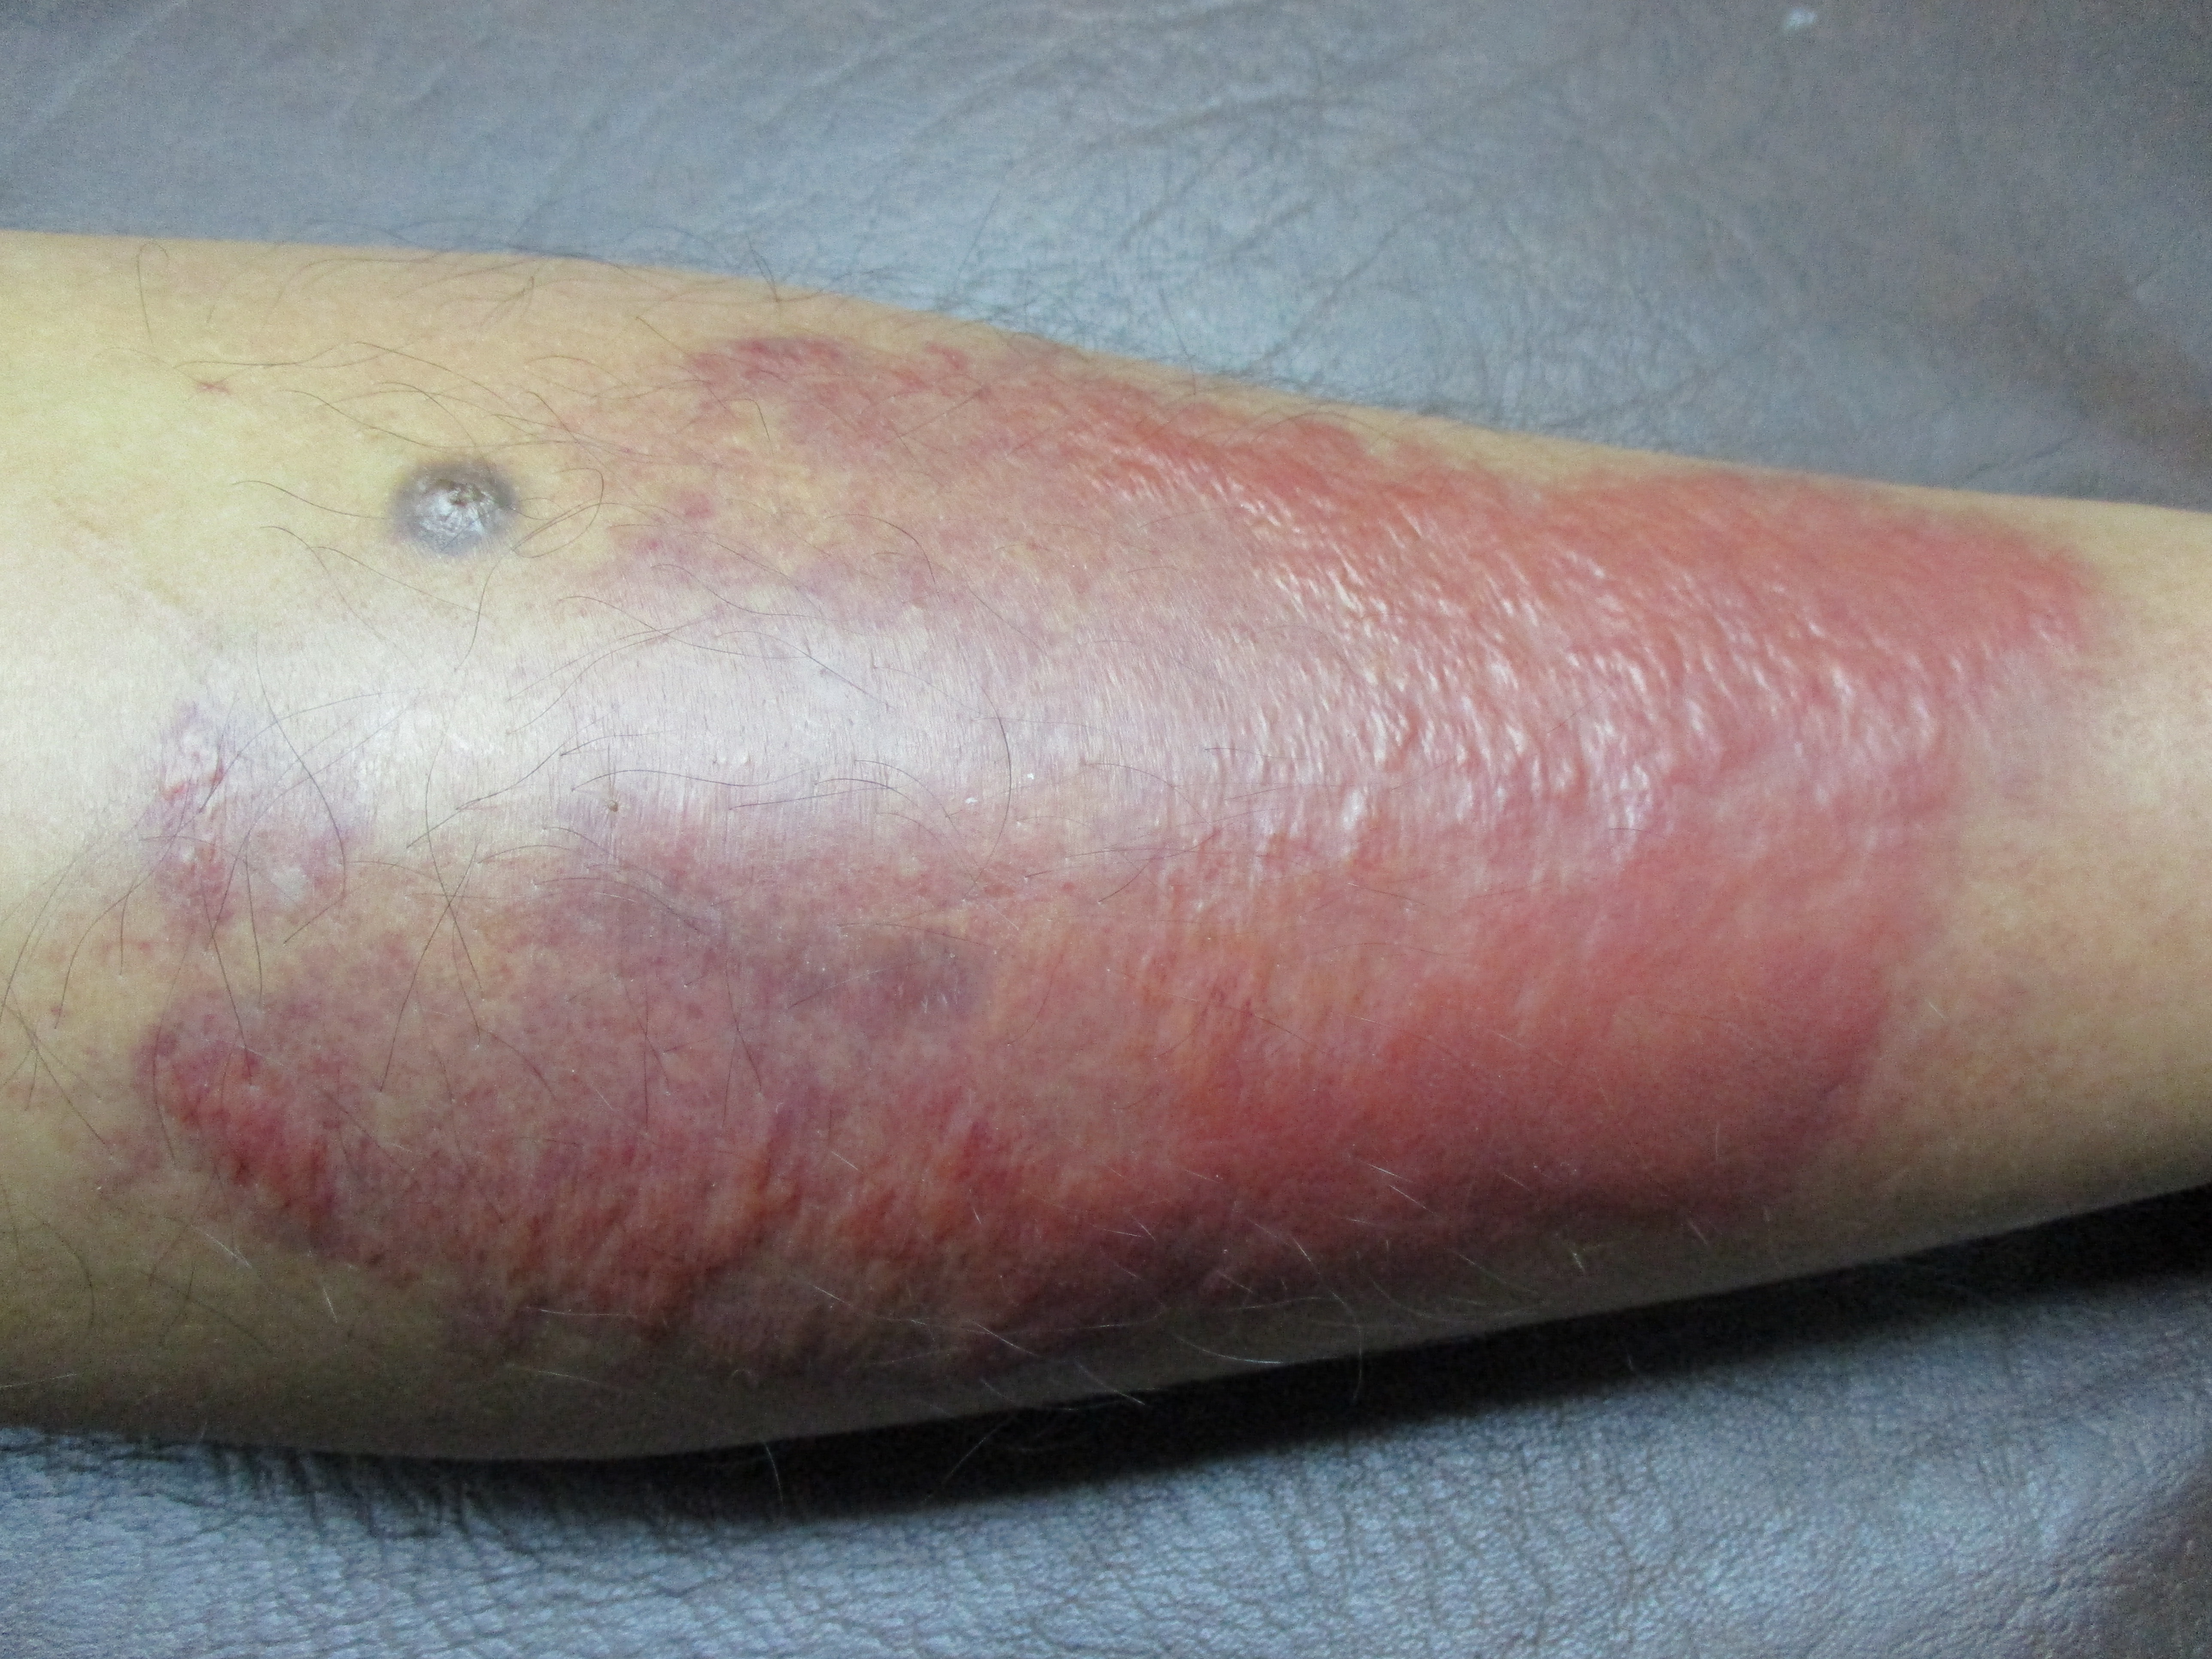 Cellulitis in Adults: Condition, Treatments, and Pictures ...